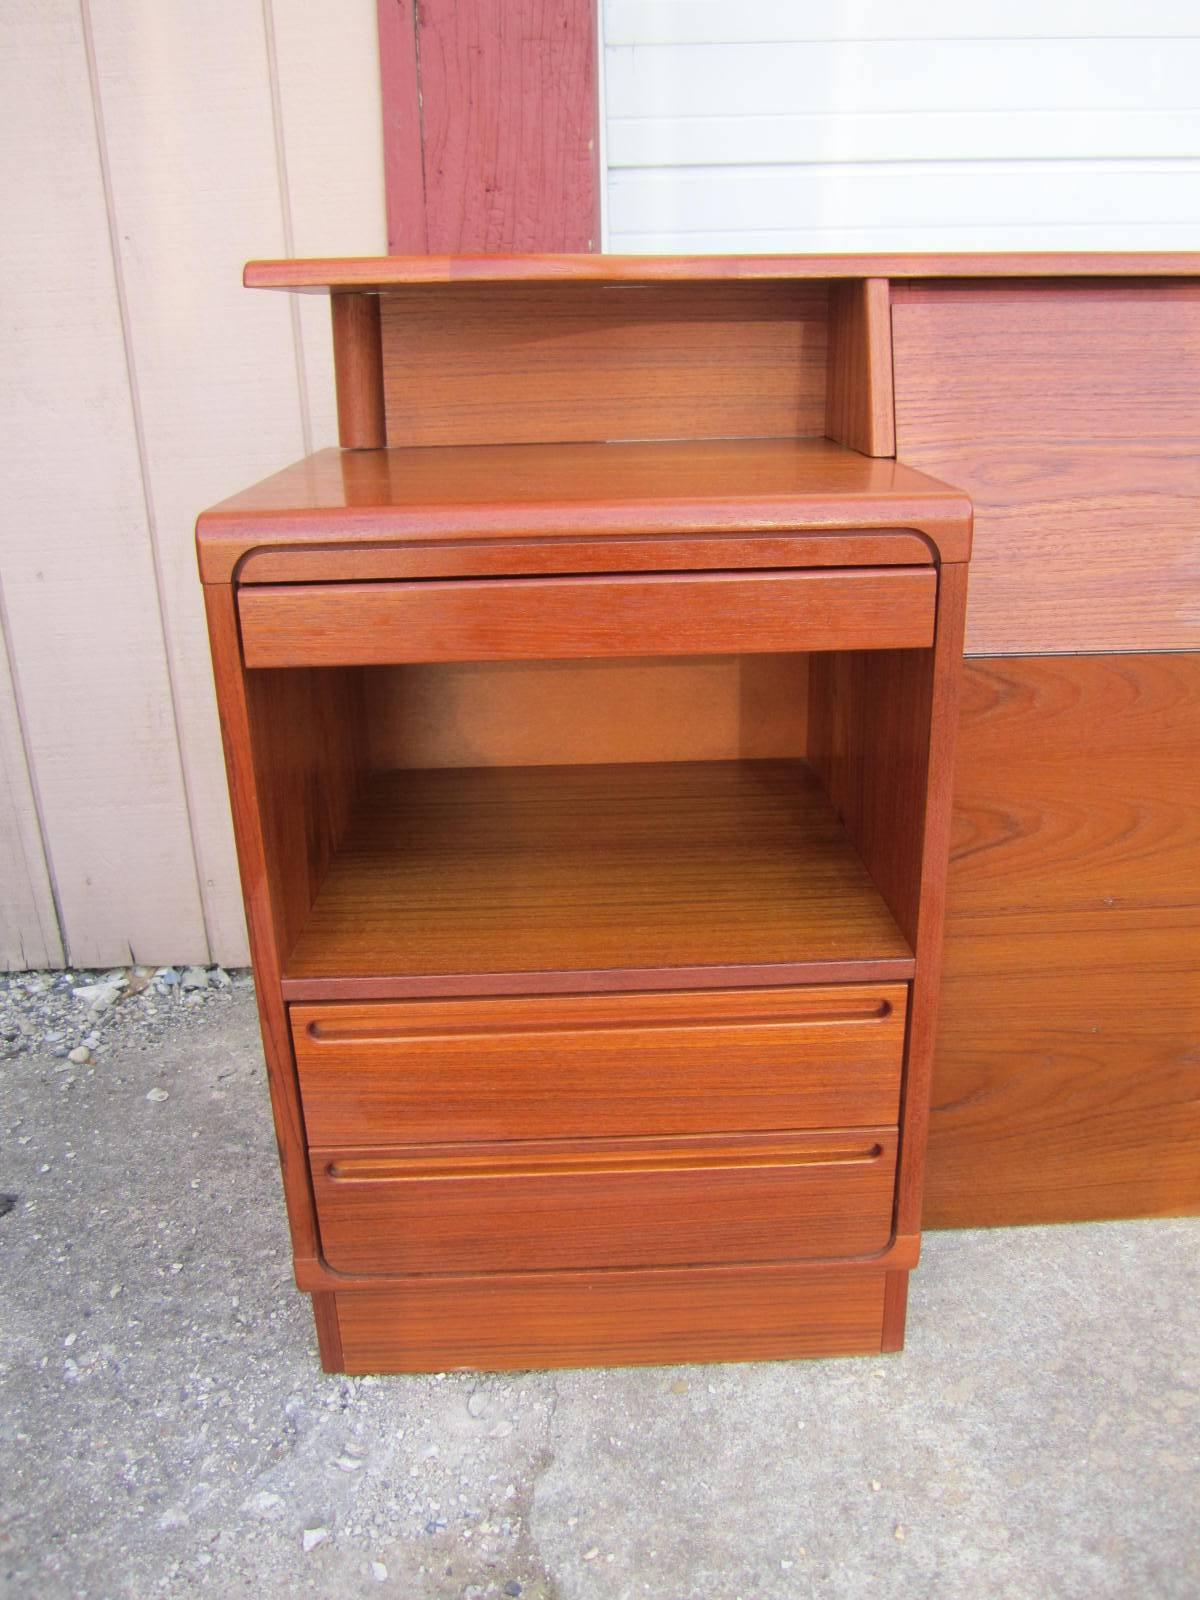 Fantastic Danish modern teak kingsize headboard with attached night stands by Torring.  This headboard is well constructed and the nightstands have fabulous pull out trays that slide out on an angle to use while in bed-how ingenious.  There is also